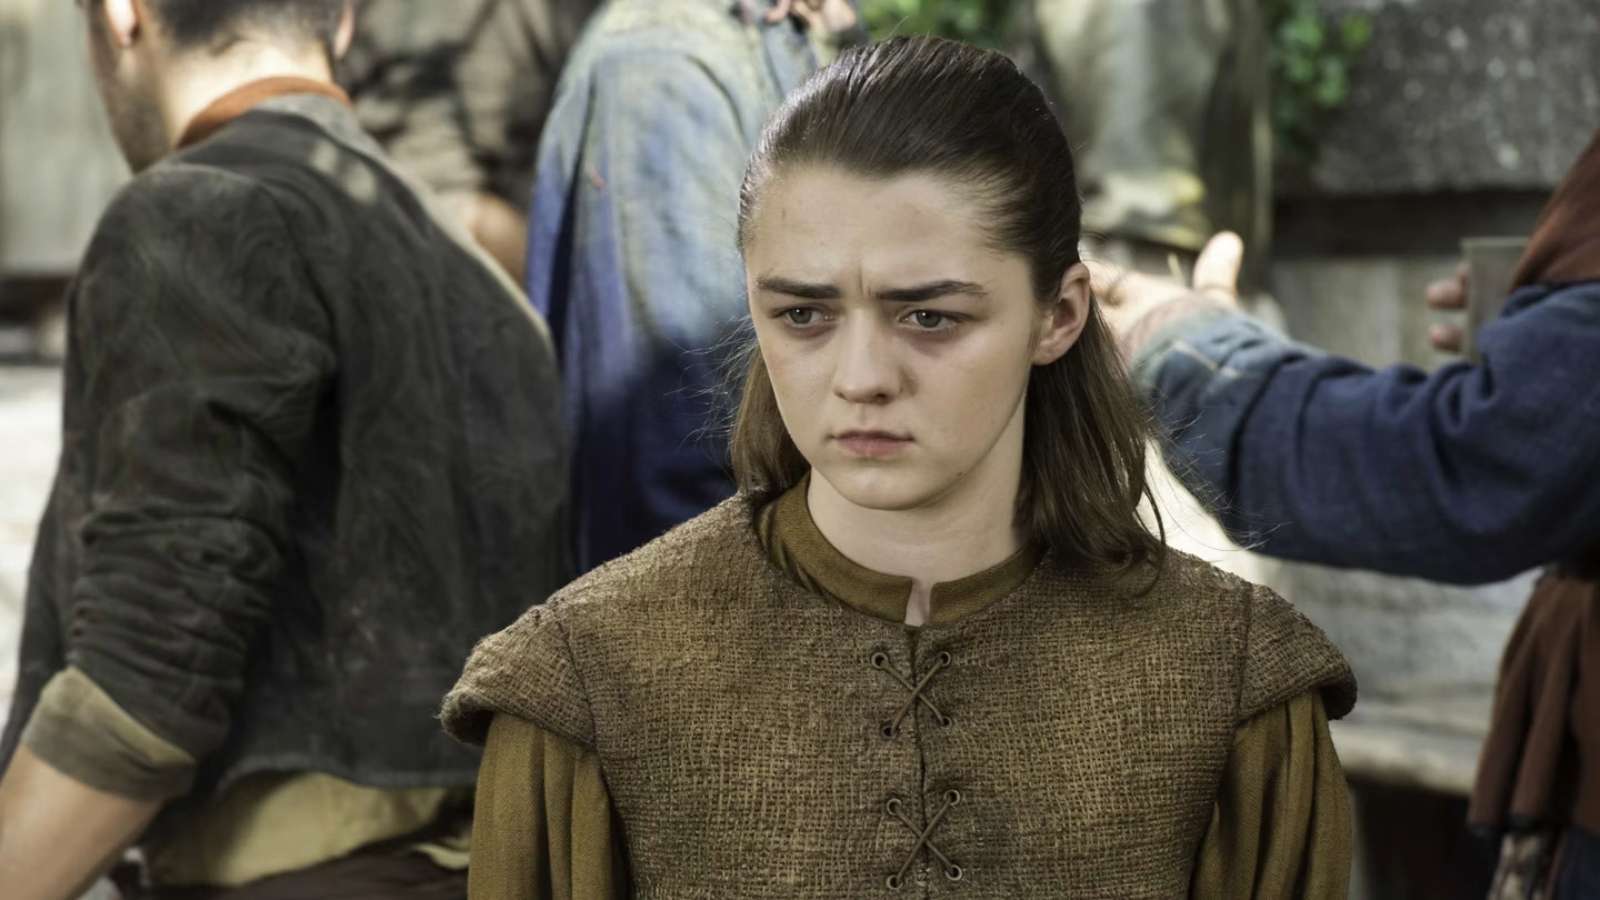 Maisie Williams as Arya Stark in Game of Thrones standing in a crowd